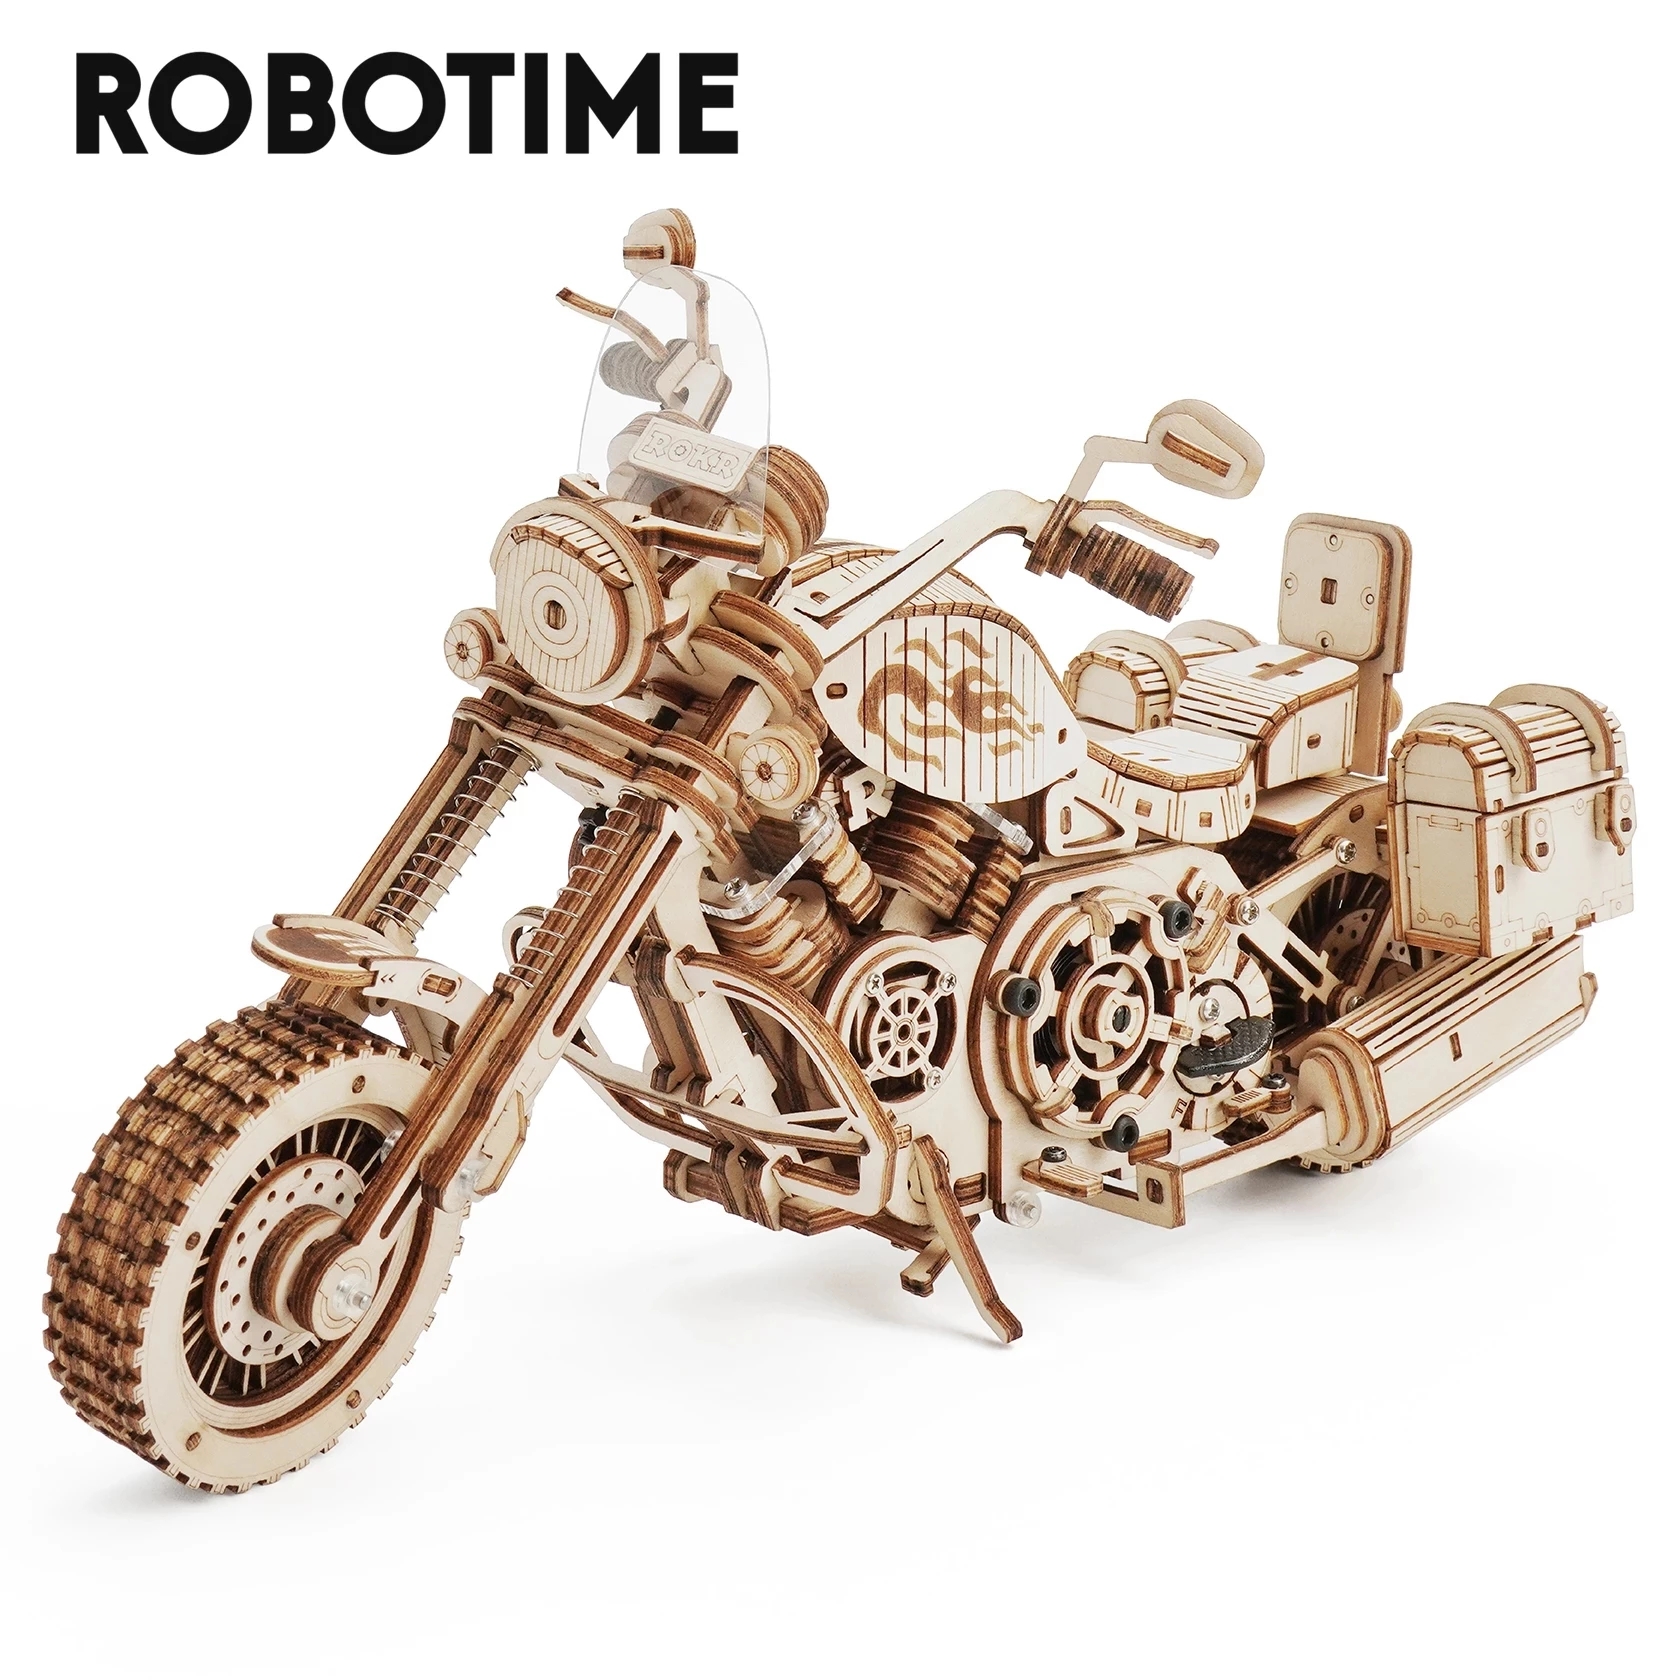 Robotime Rokr Cruiser Motorcycle DIY Wooden Model 420 Pcs Building Block Kits Funny Toys Gifts For Children Adults